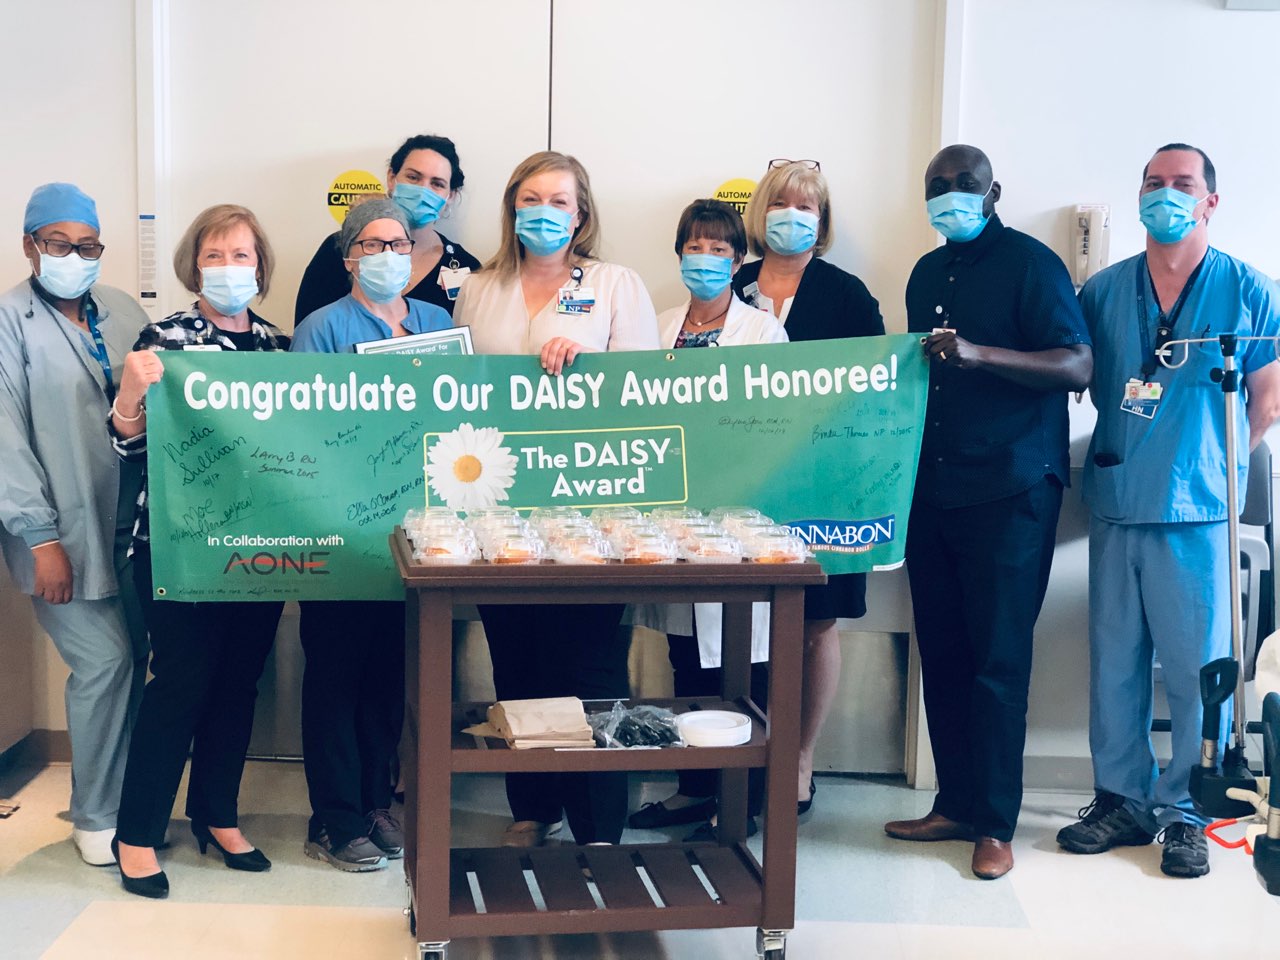 Photo of Mary Deseignora receiving a DAISY award from her colleagues